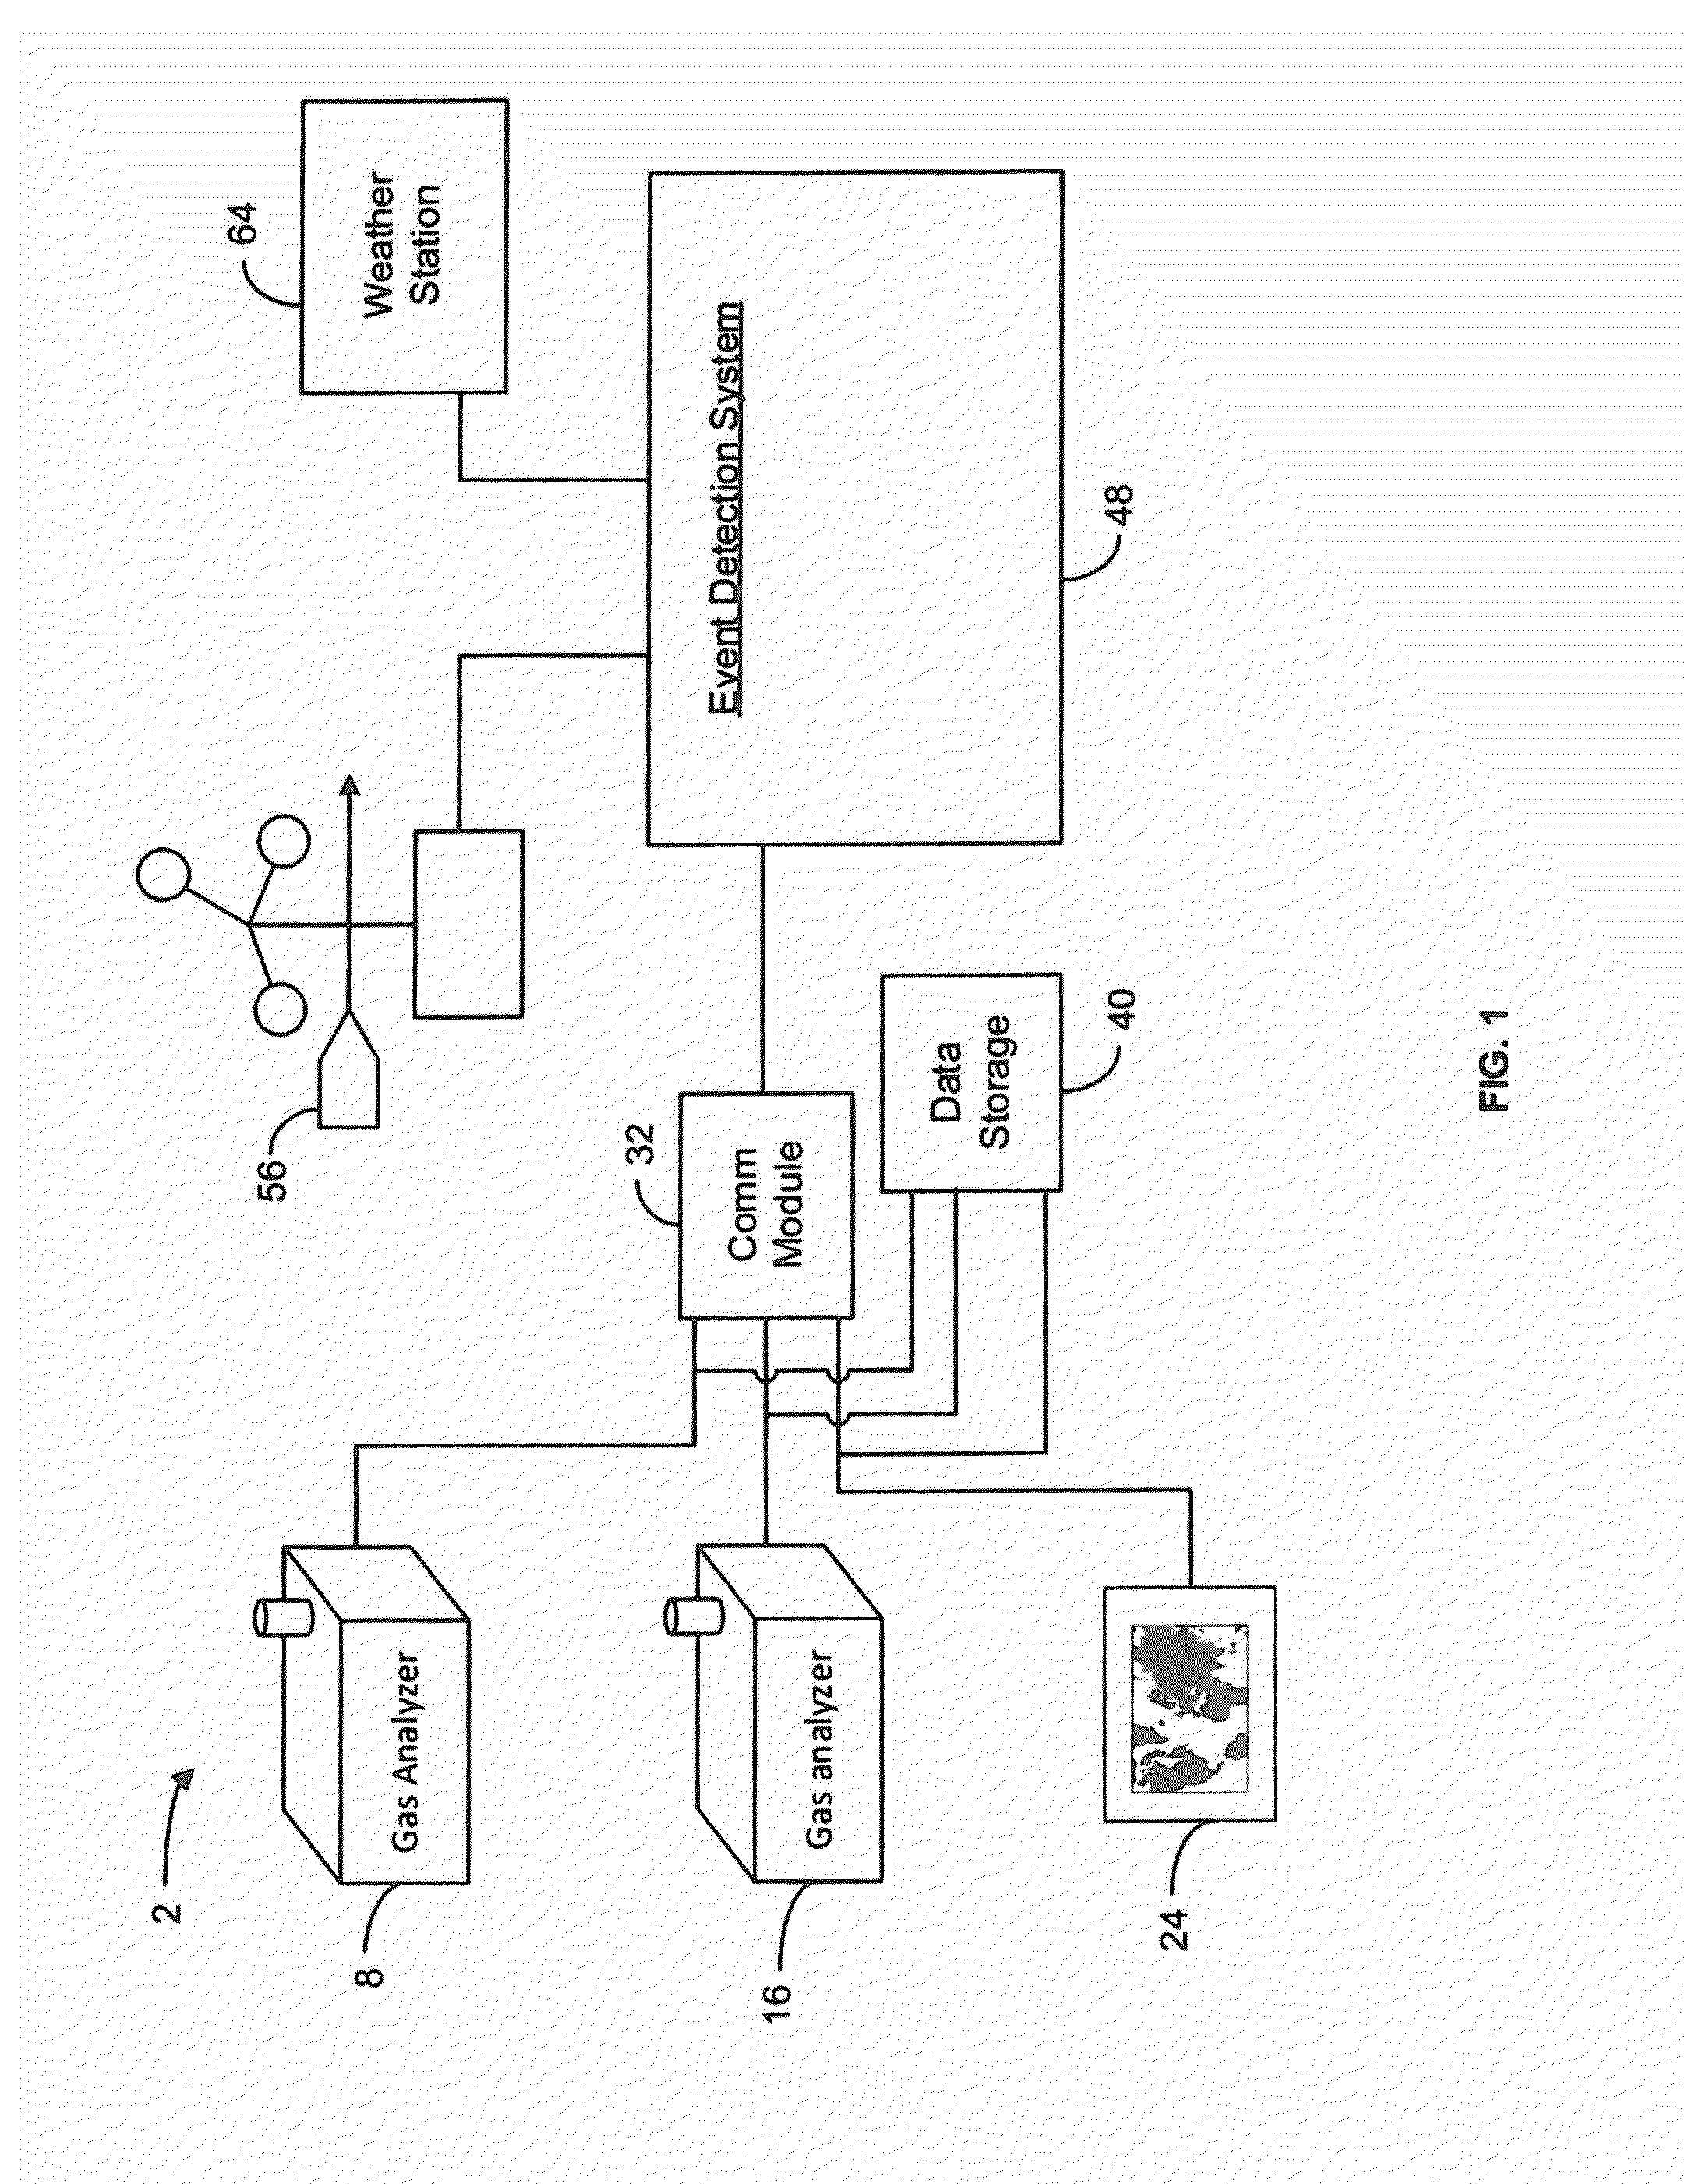 Gas emission detection device, system and method